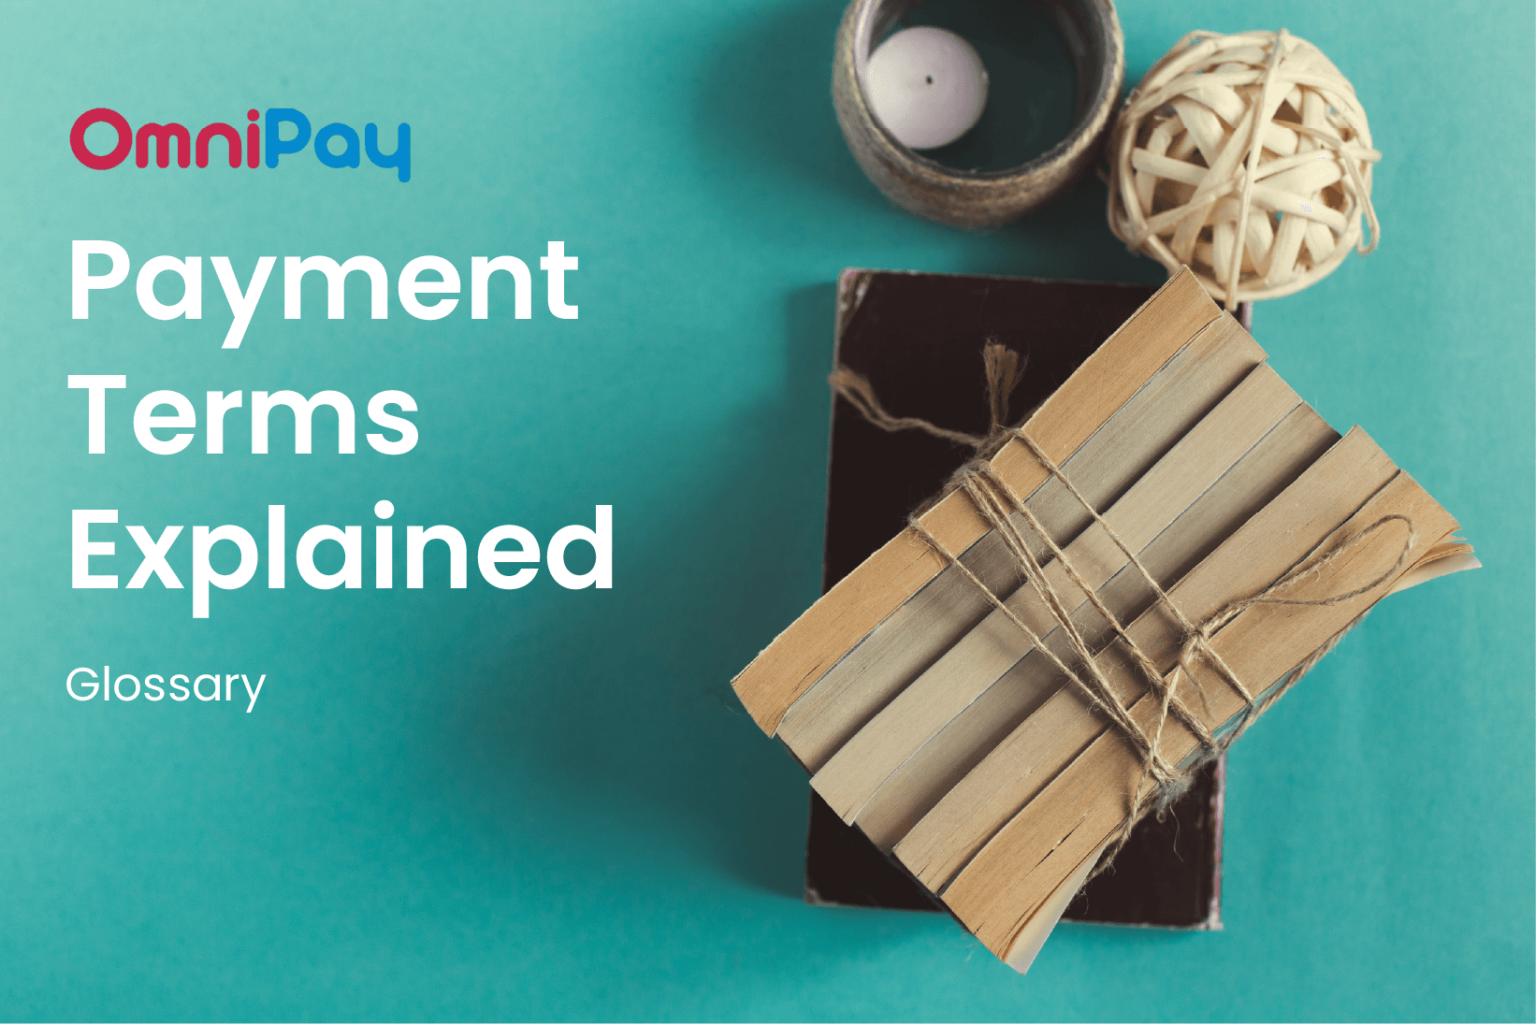 payment-terms-glossary-omnipay-reads